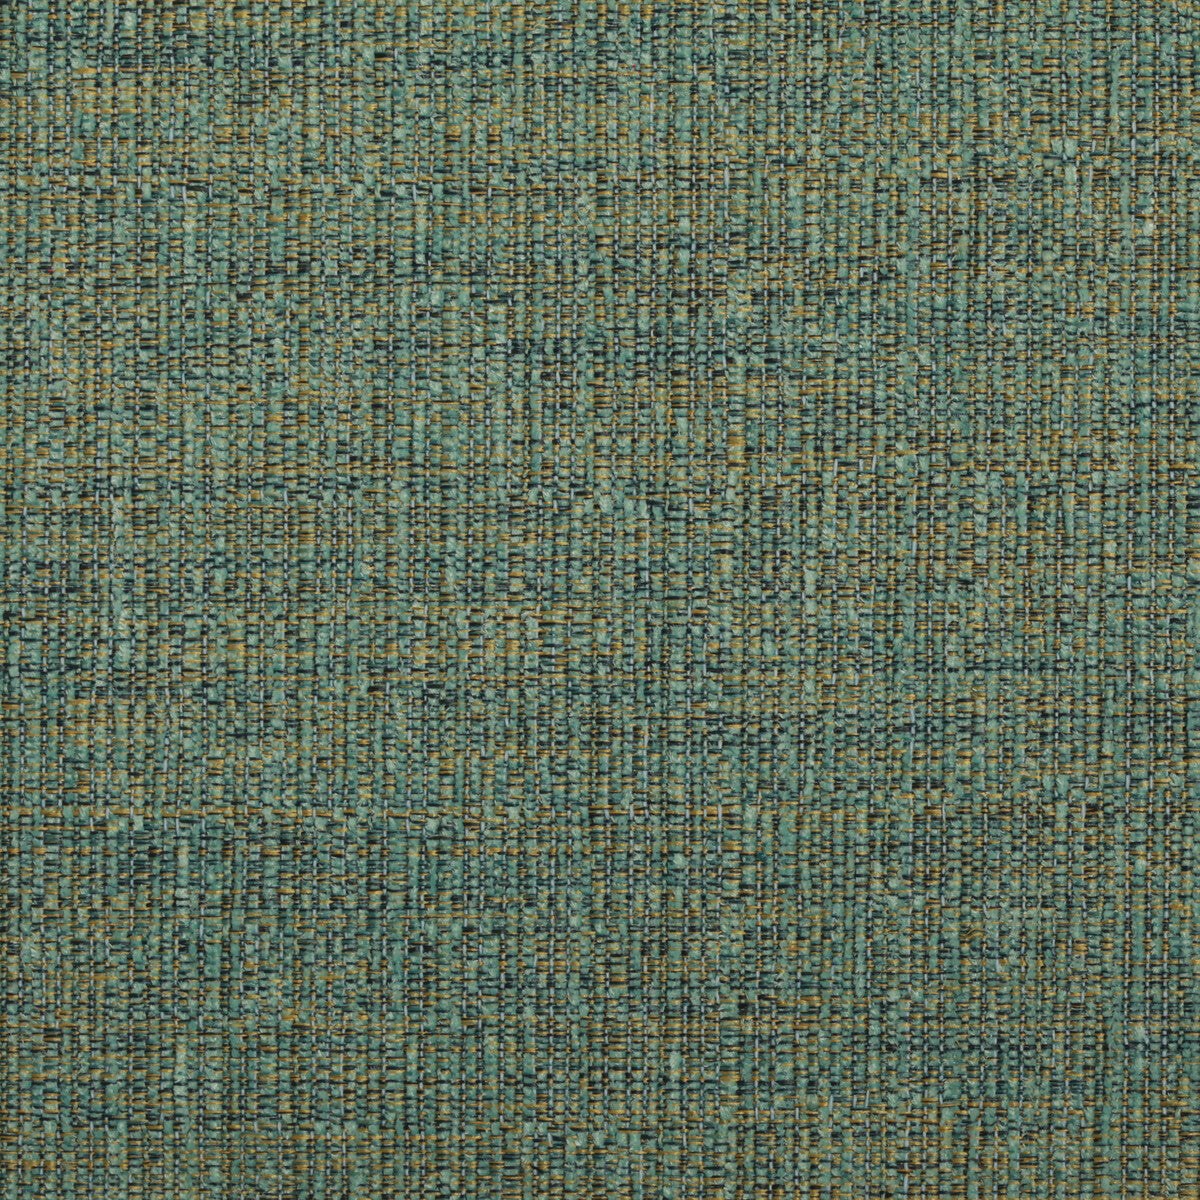 Kravet Contract fabric in 35128-135 color - pattern 35128.135.0 - by Kravet Contract in the Crypton Incase collection